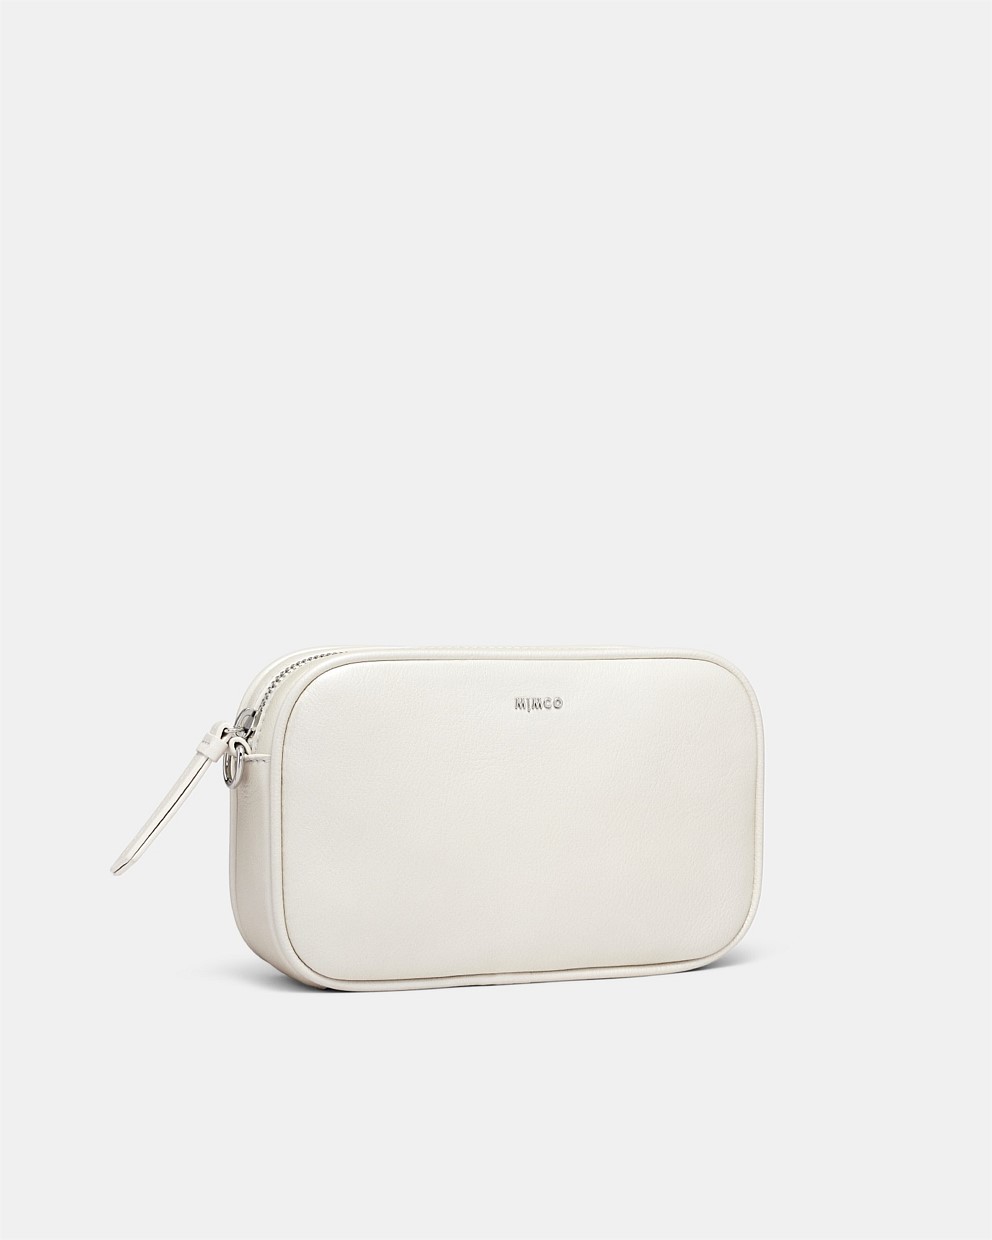 Pearlised White Classico Pouch - Pouches | Mimco